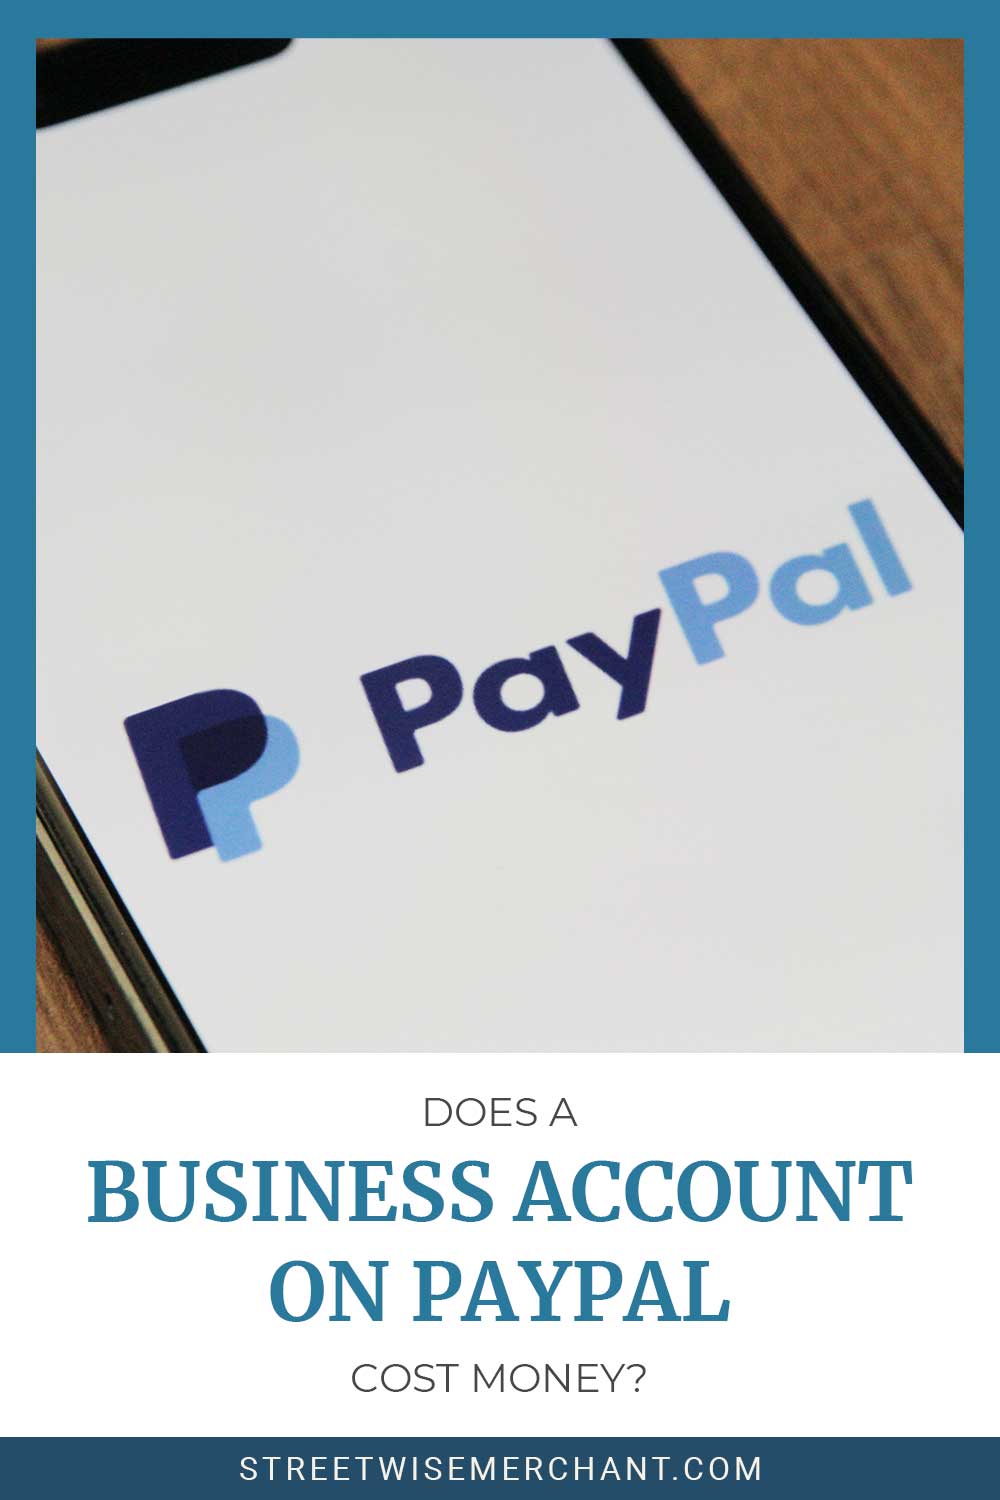 Paypal logo on an iPhone screen - Does a Business Account on PayPal Cost Money?